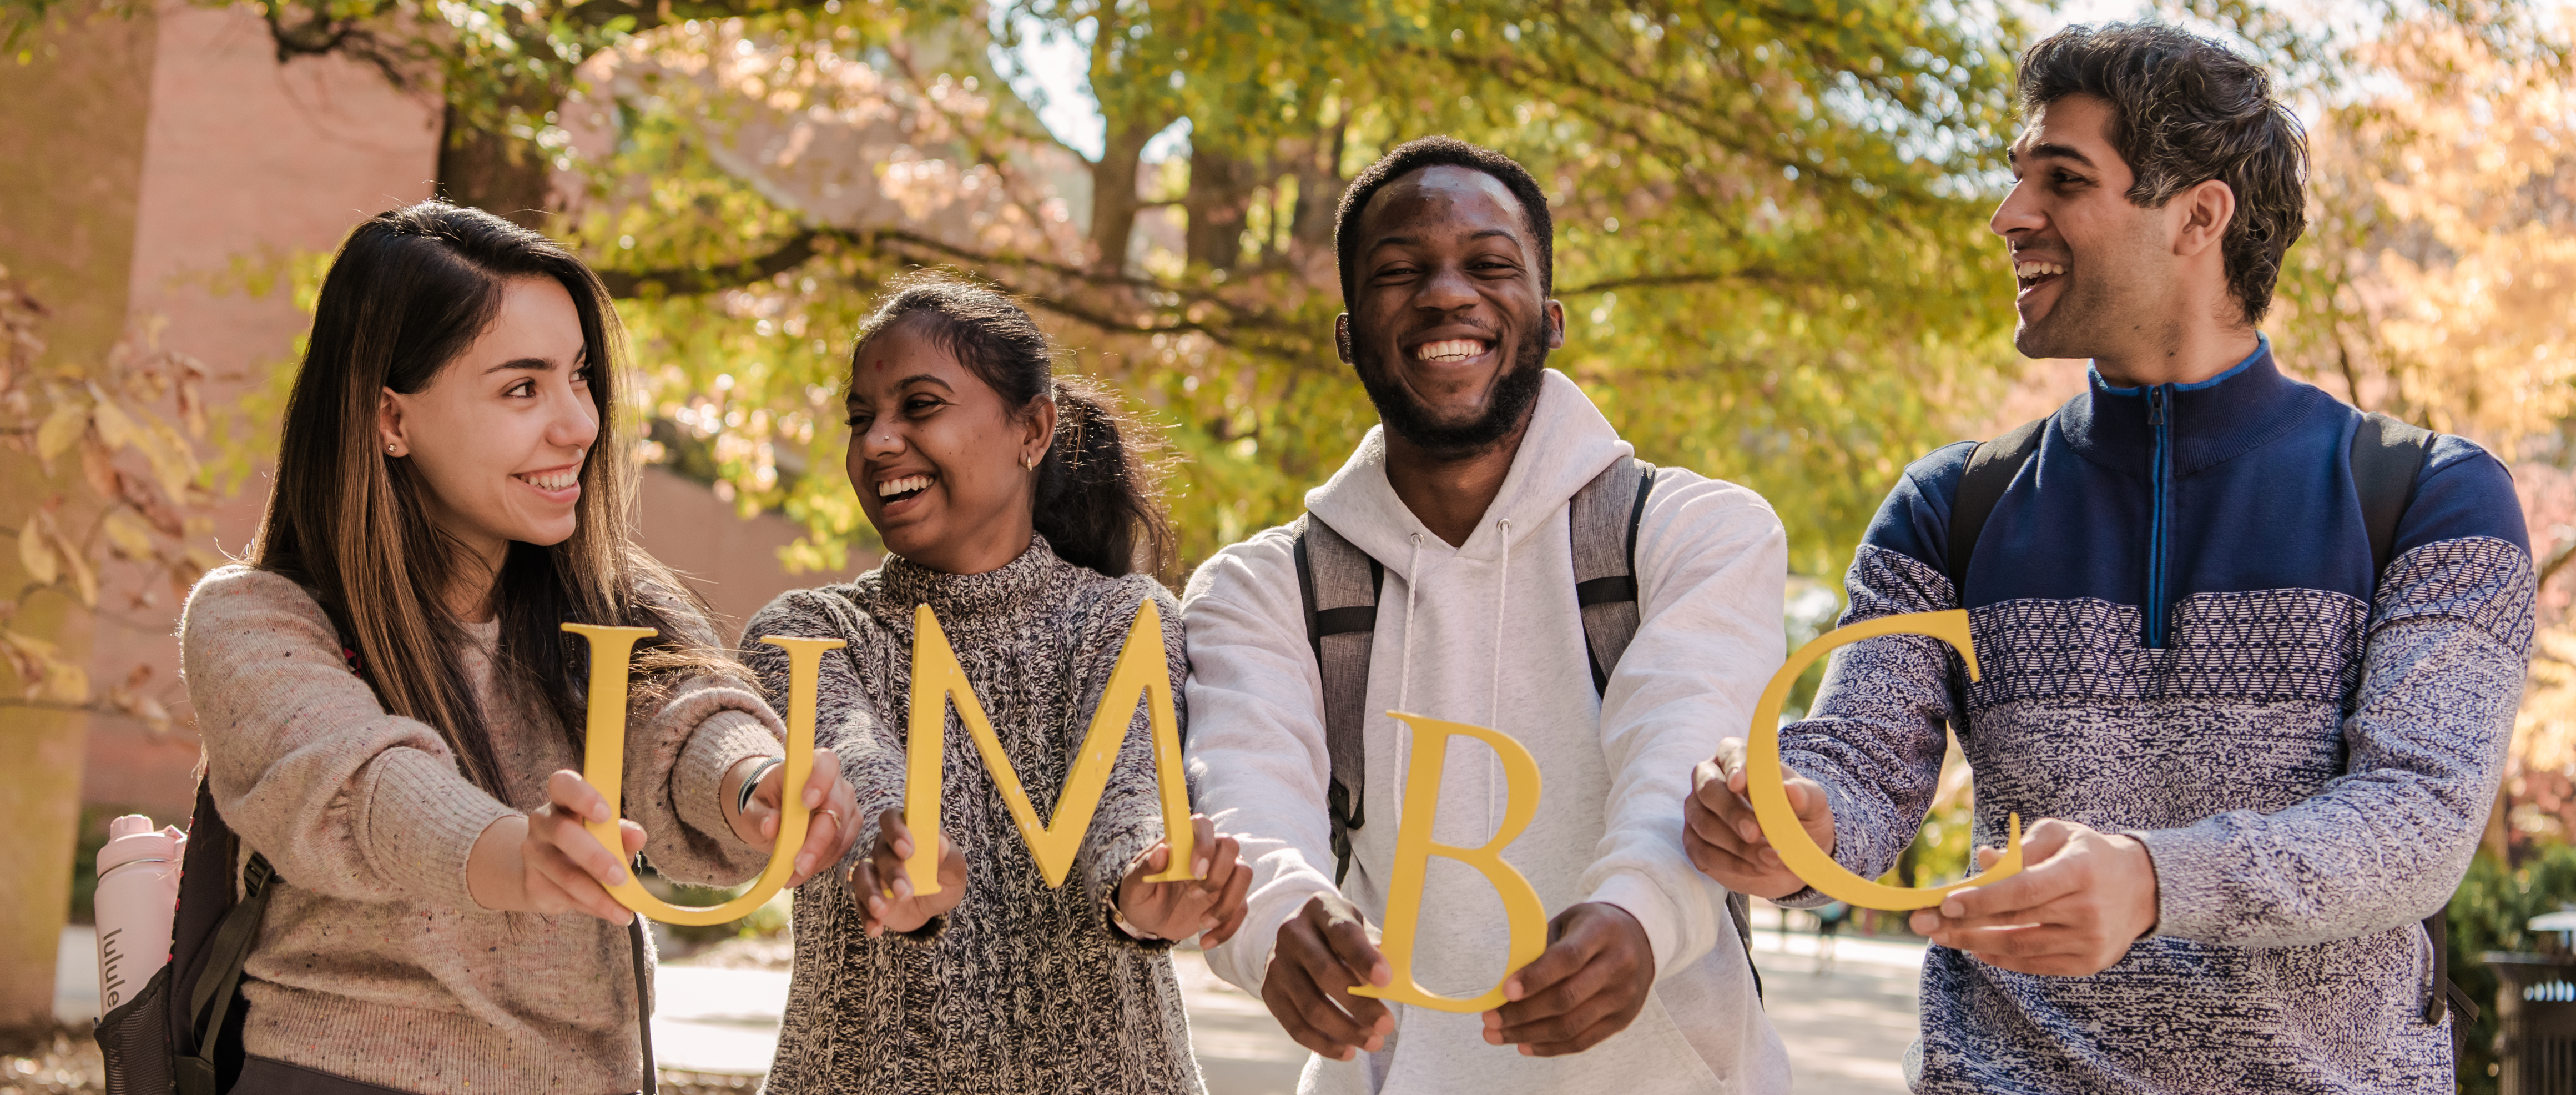 Four students holding gold UMBC letters laughing and smiling